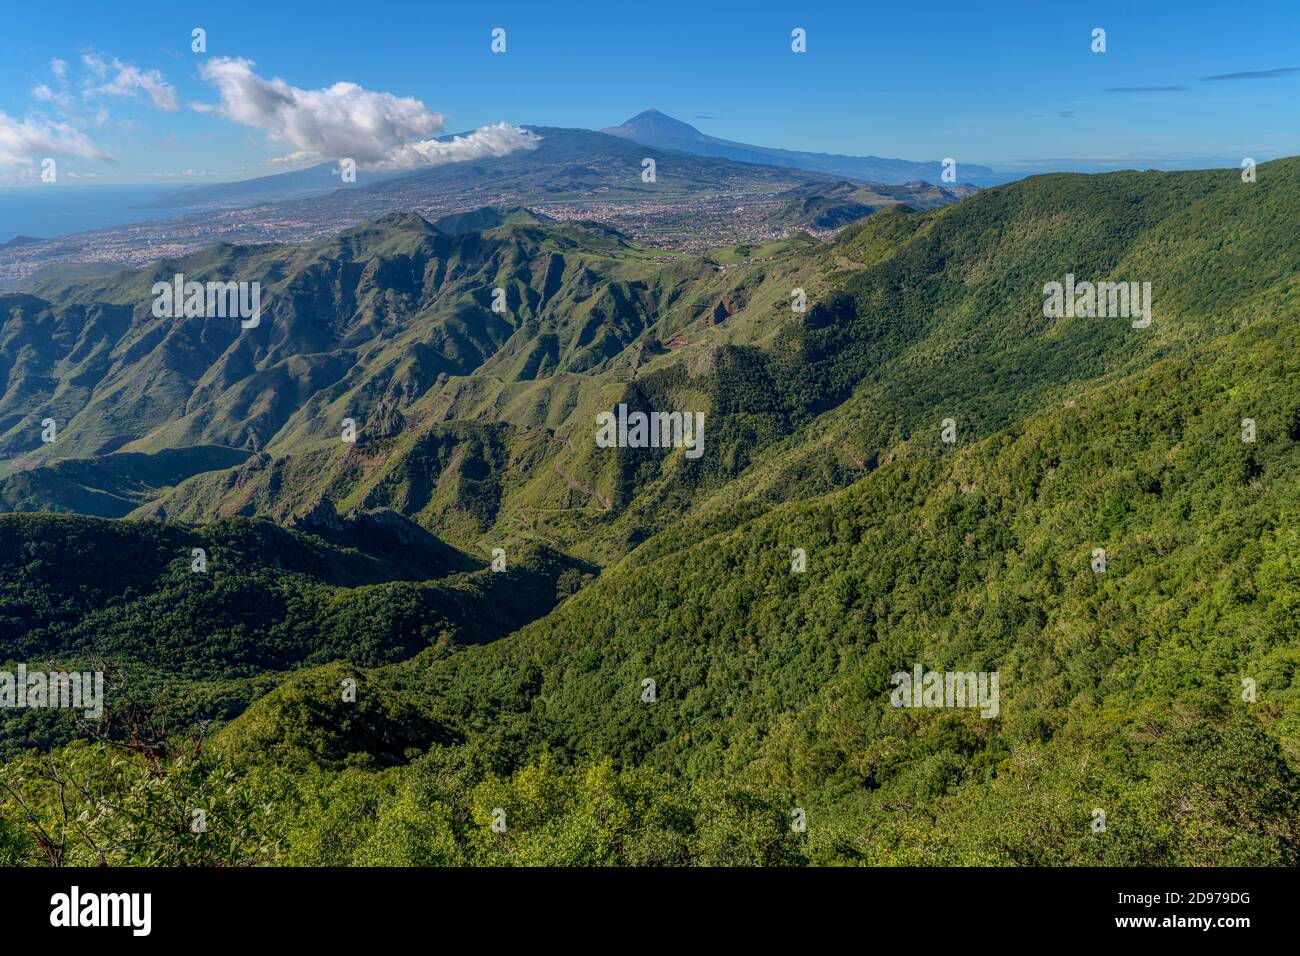 Landscape of the Anaga peninsula, on the island of Tenerife in the Canaries. on the horizon, the Teide volcano - The high slopes of the ravines are co Stock Photo